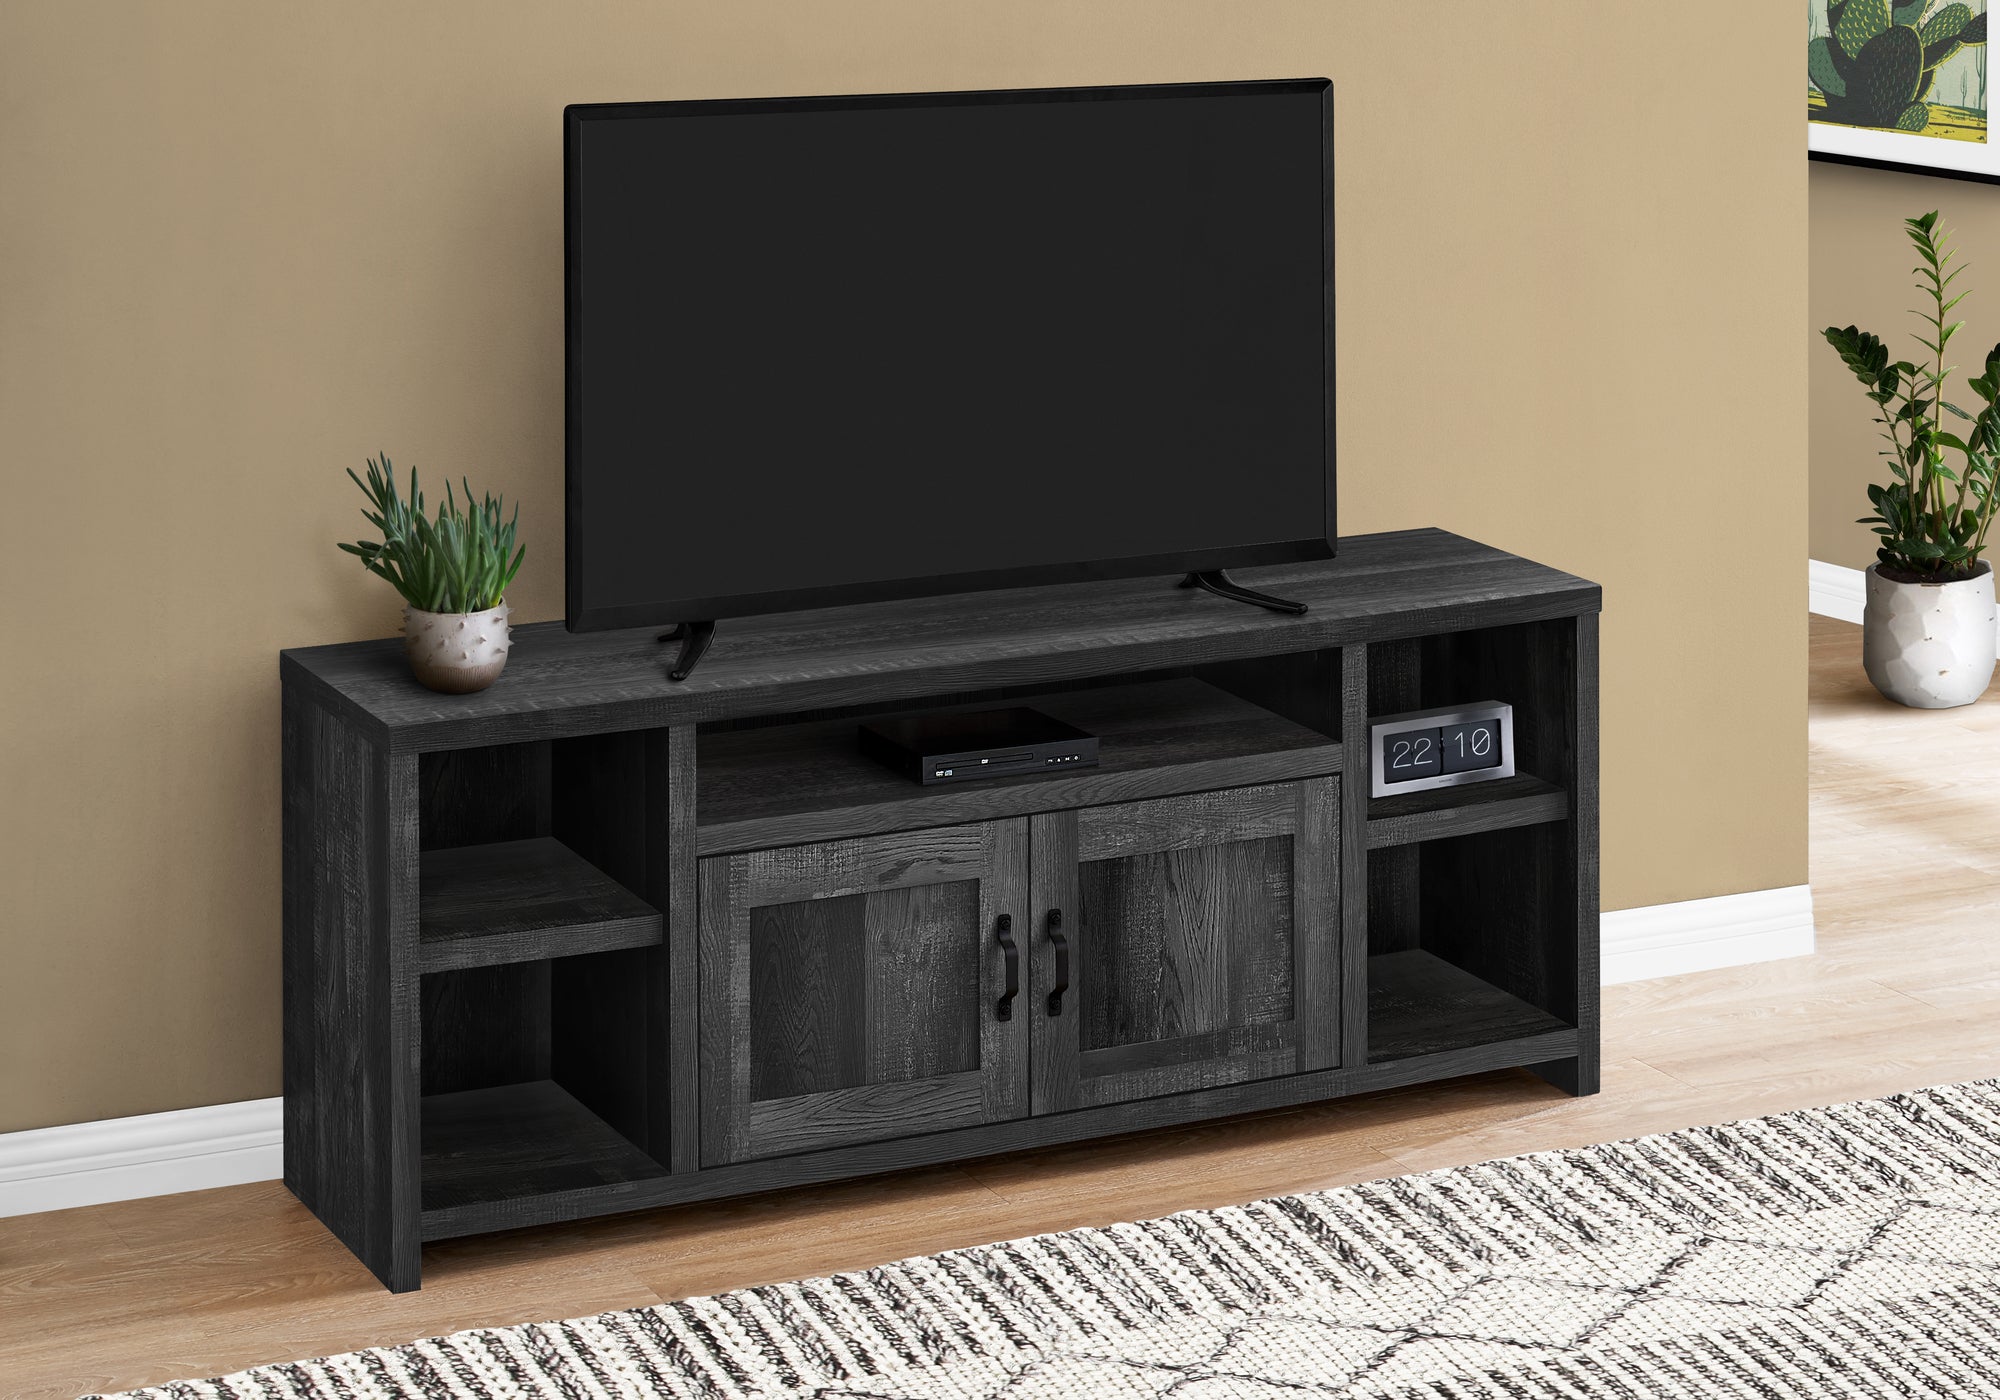 I 2743 - TV STAND - 60"L / BLACK RECLAIMED WOOD-LOOK BY MONARCH SPECIALTIES INC